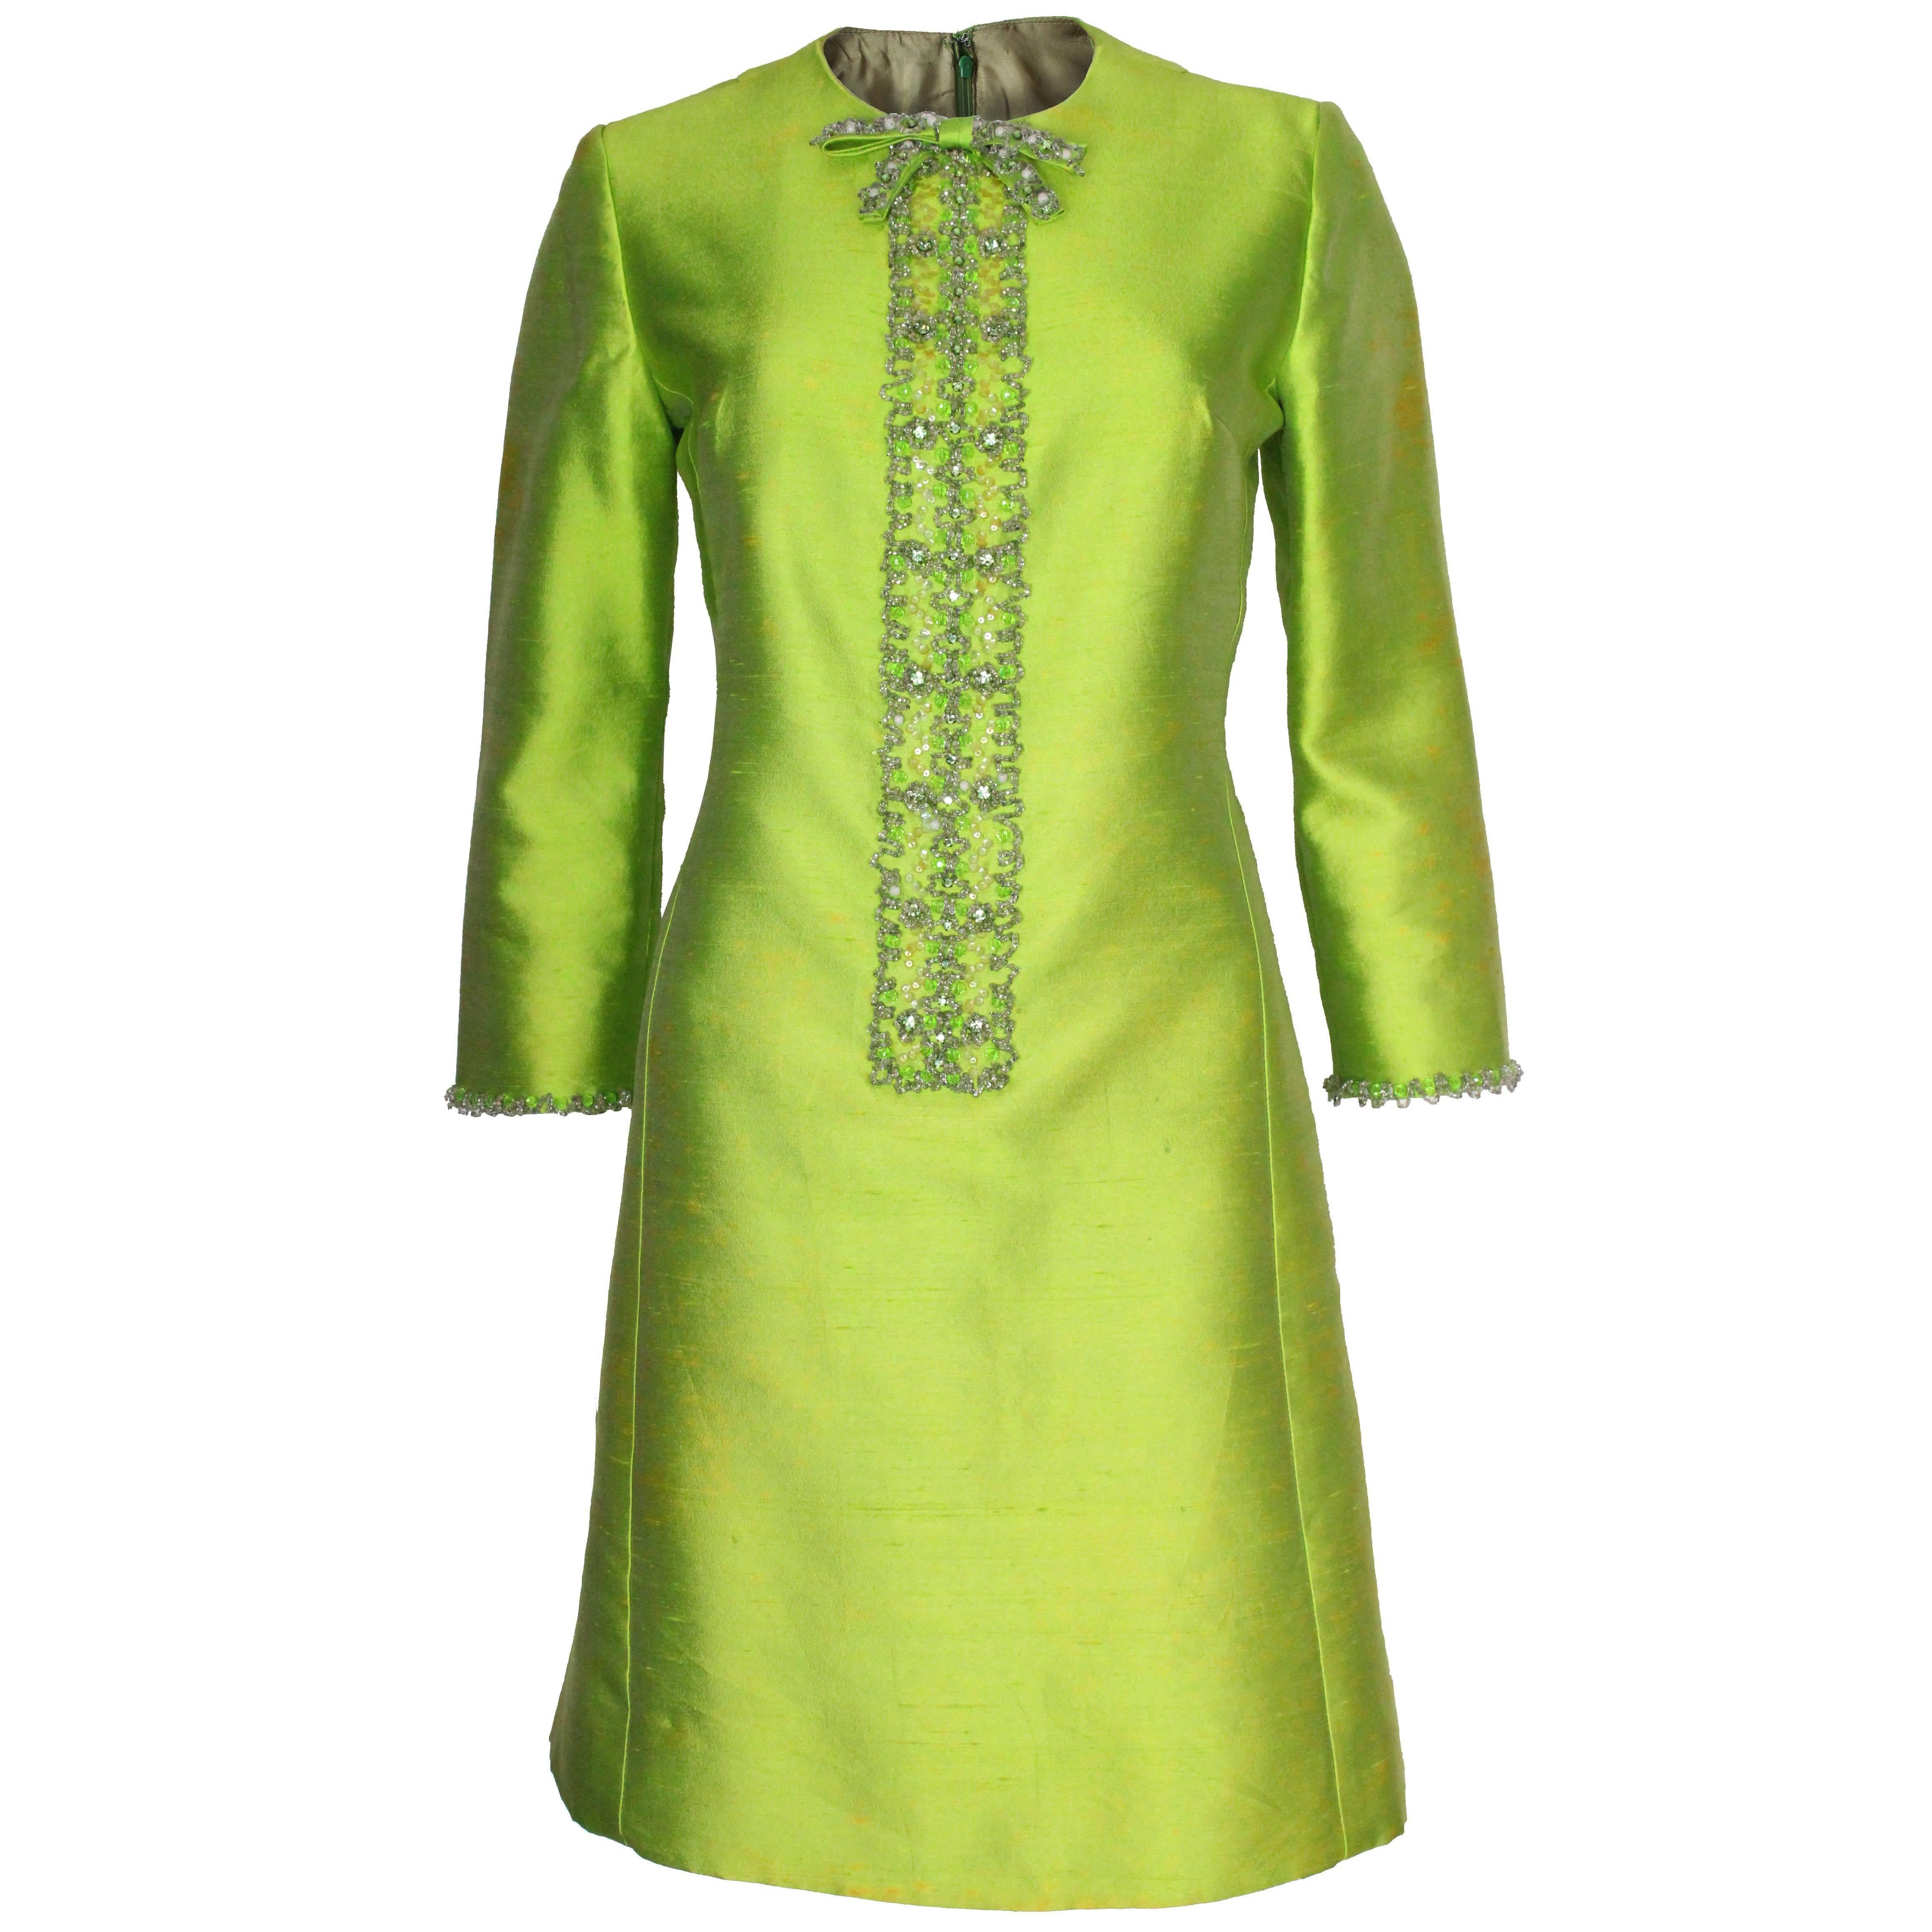 1960s Bright Green Embellished Silk Cocktail Dress For Sale